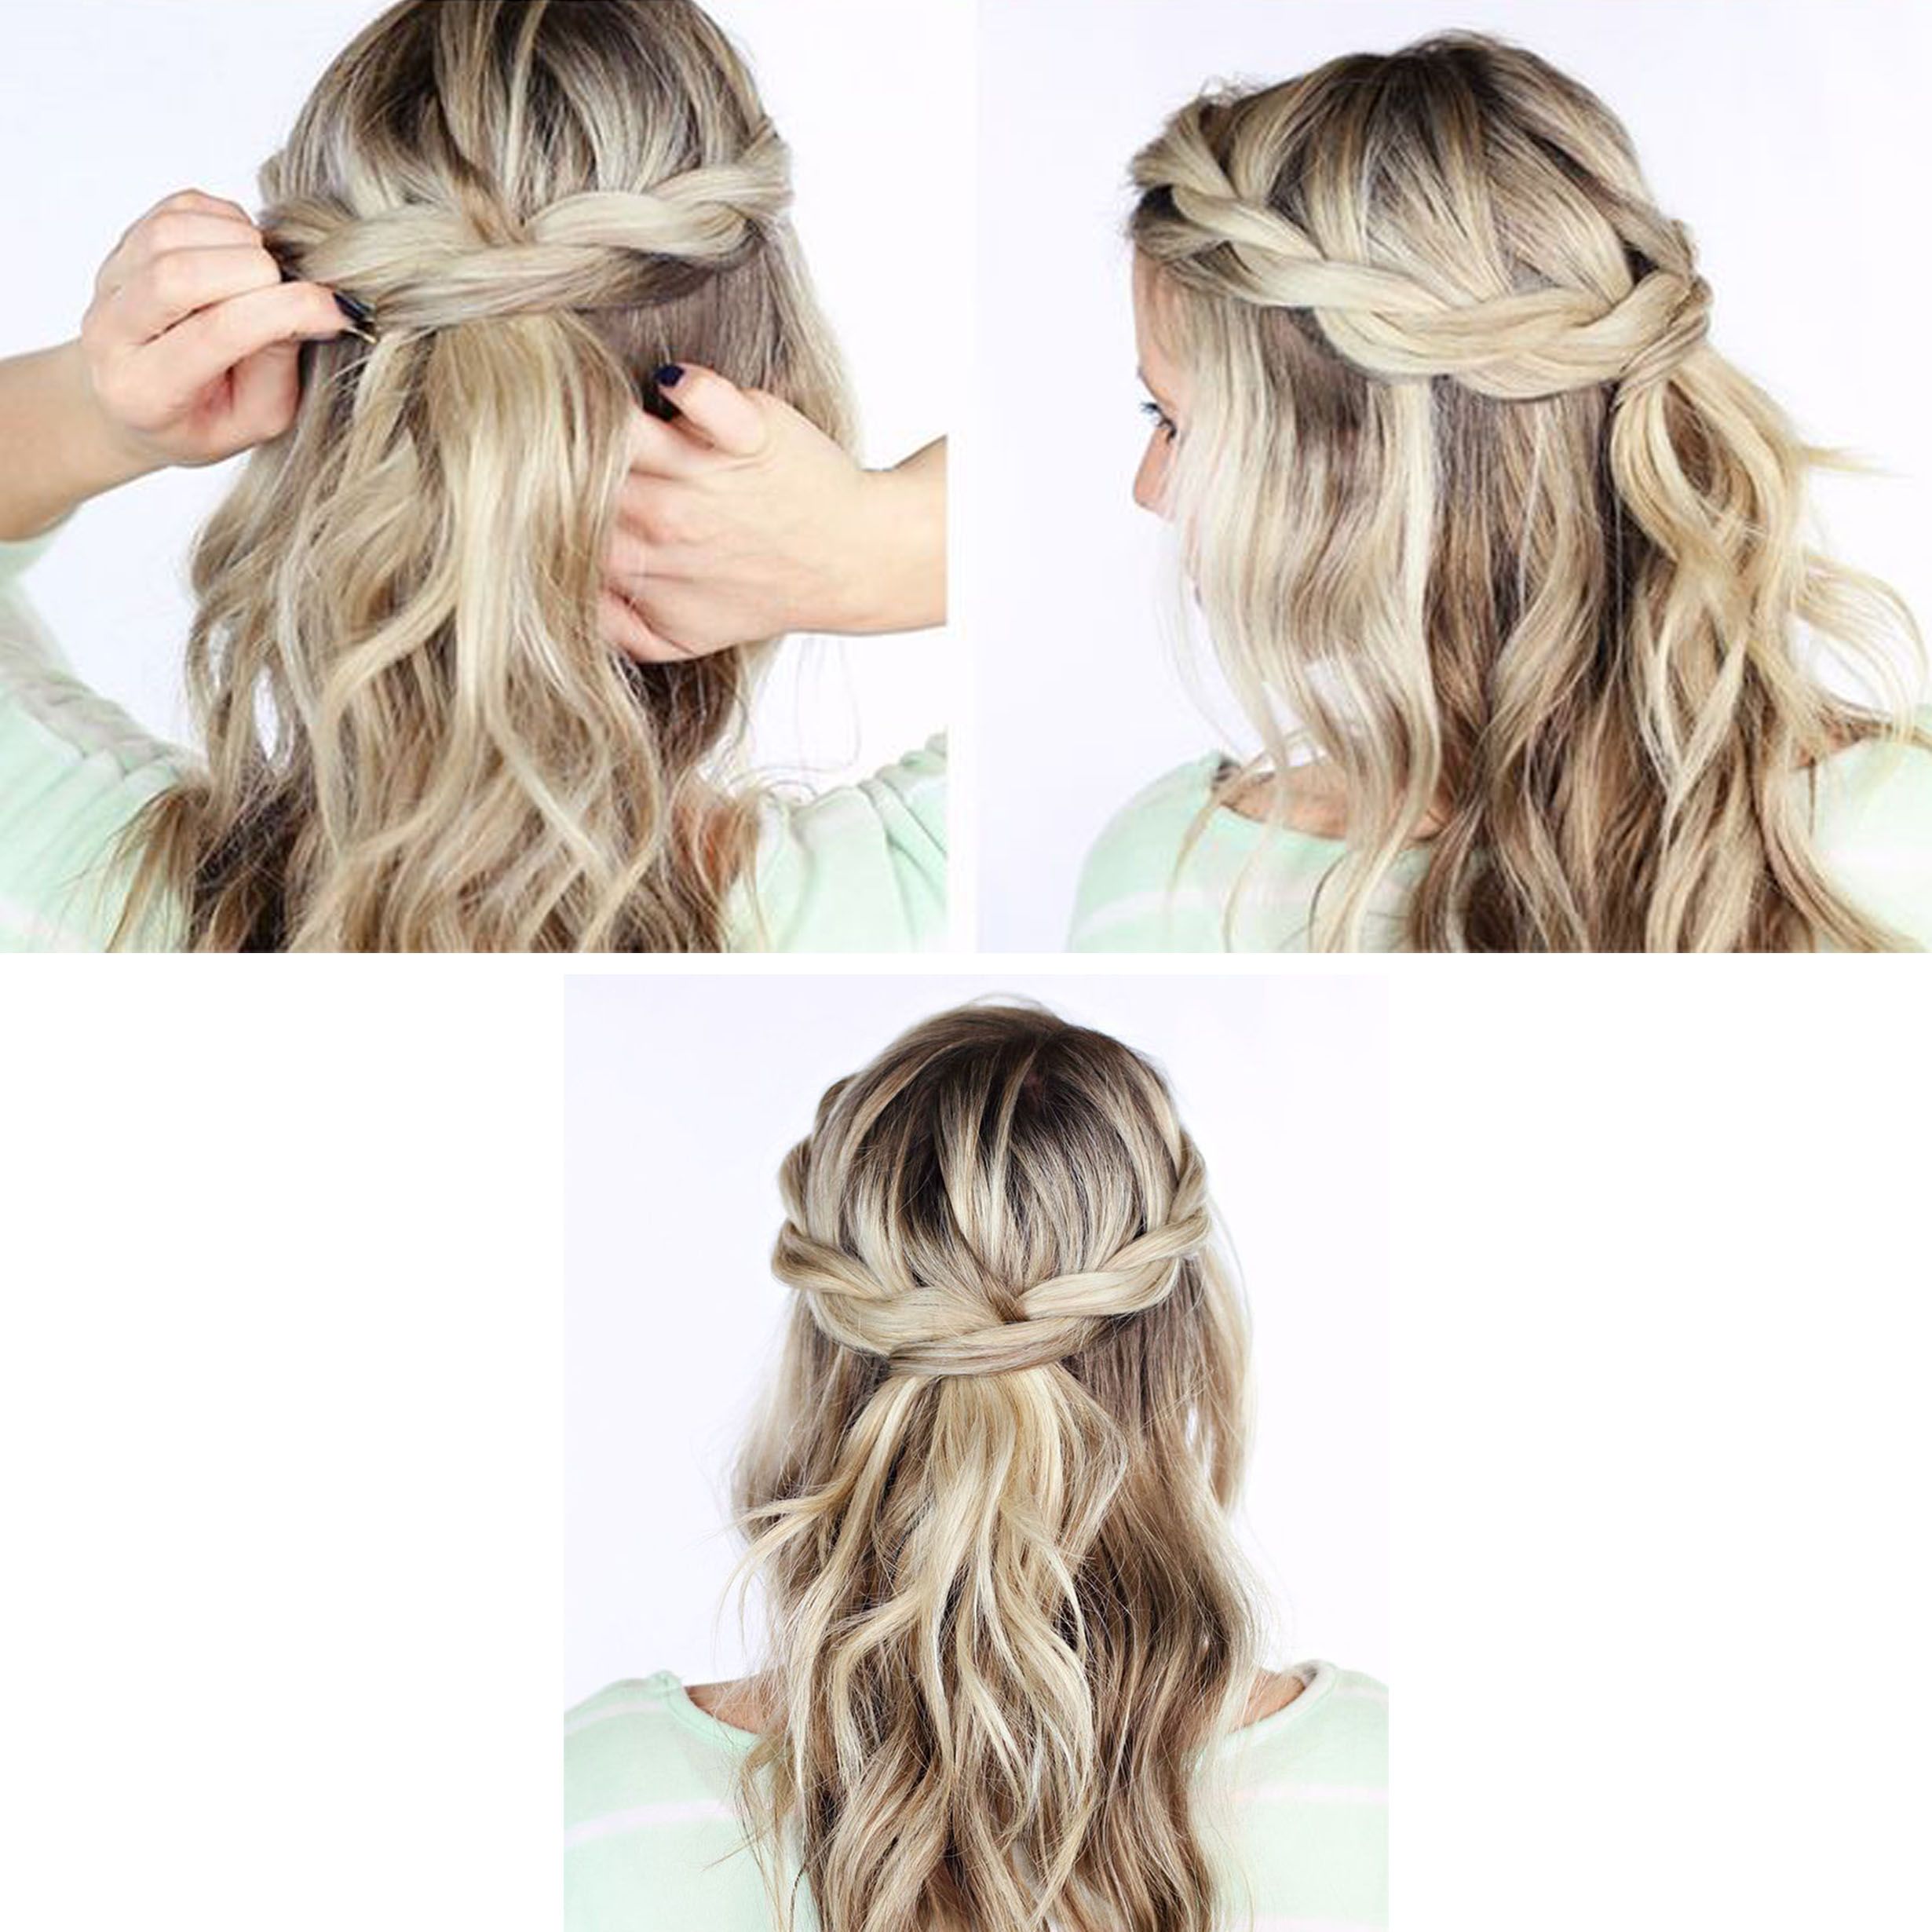 how-to-twisted-crown-braid-4-ad2e6ff883ad5e8ee8508c2ec52eed34.jpg